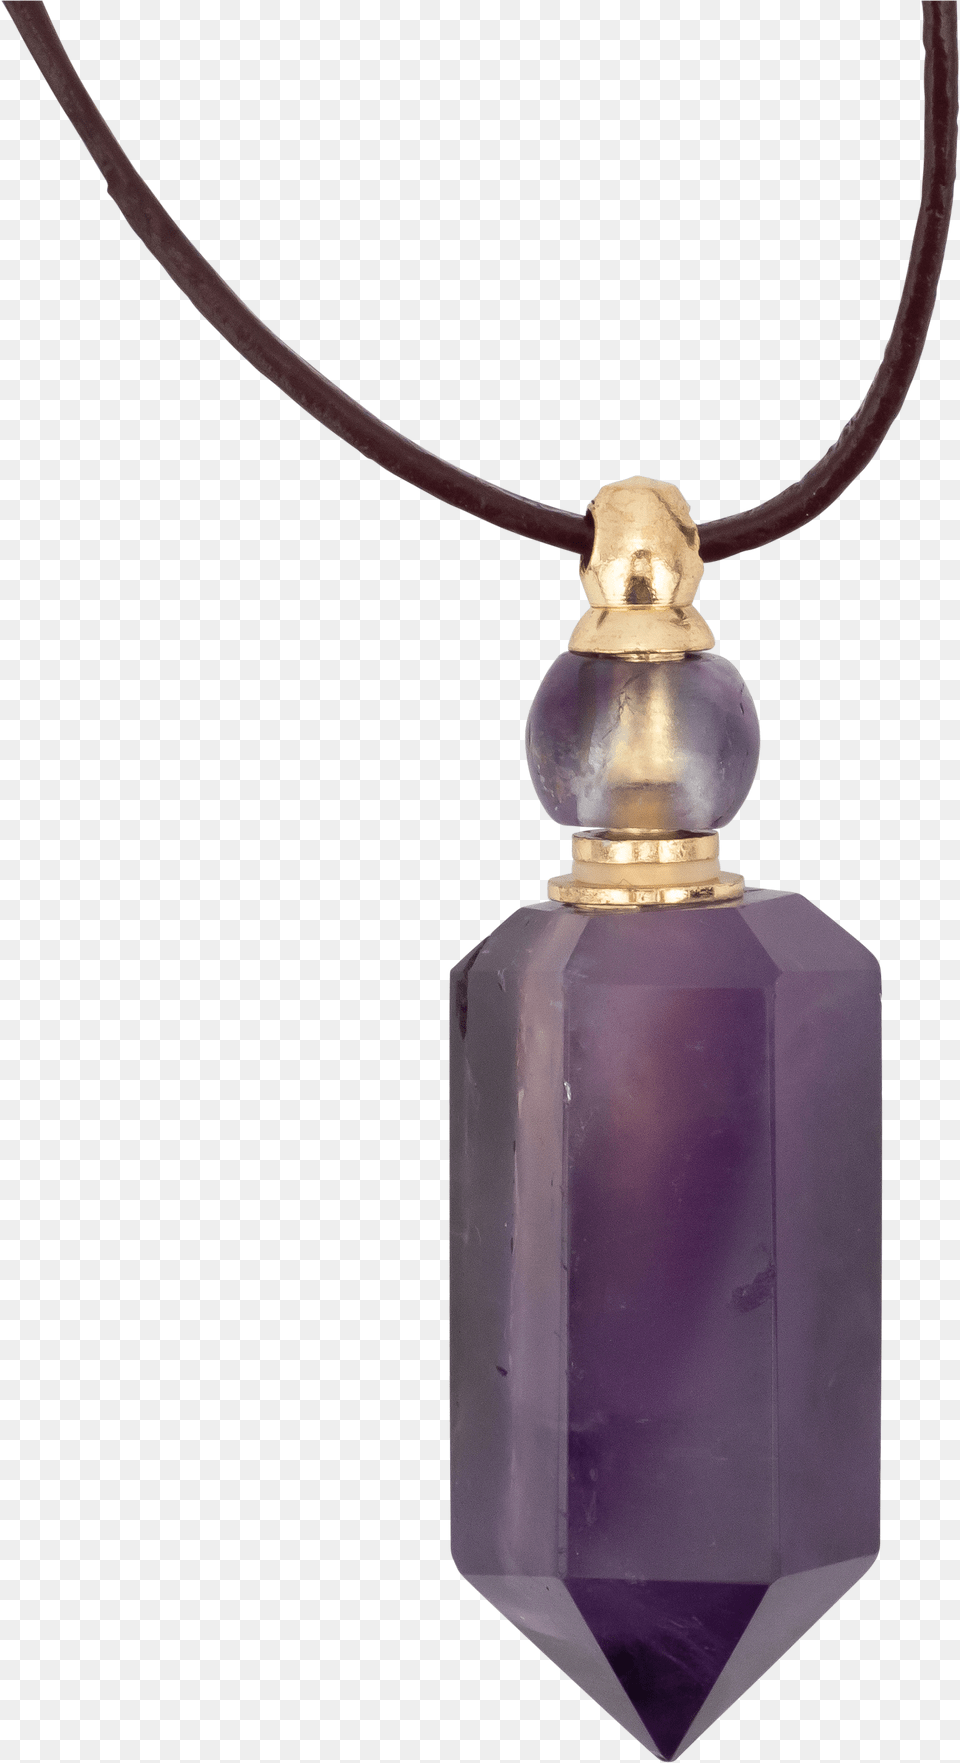 Zengo Amethyst Crystal Vial Necklace, Accessories, Gemstone, Jewelry, Ornament Png Image